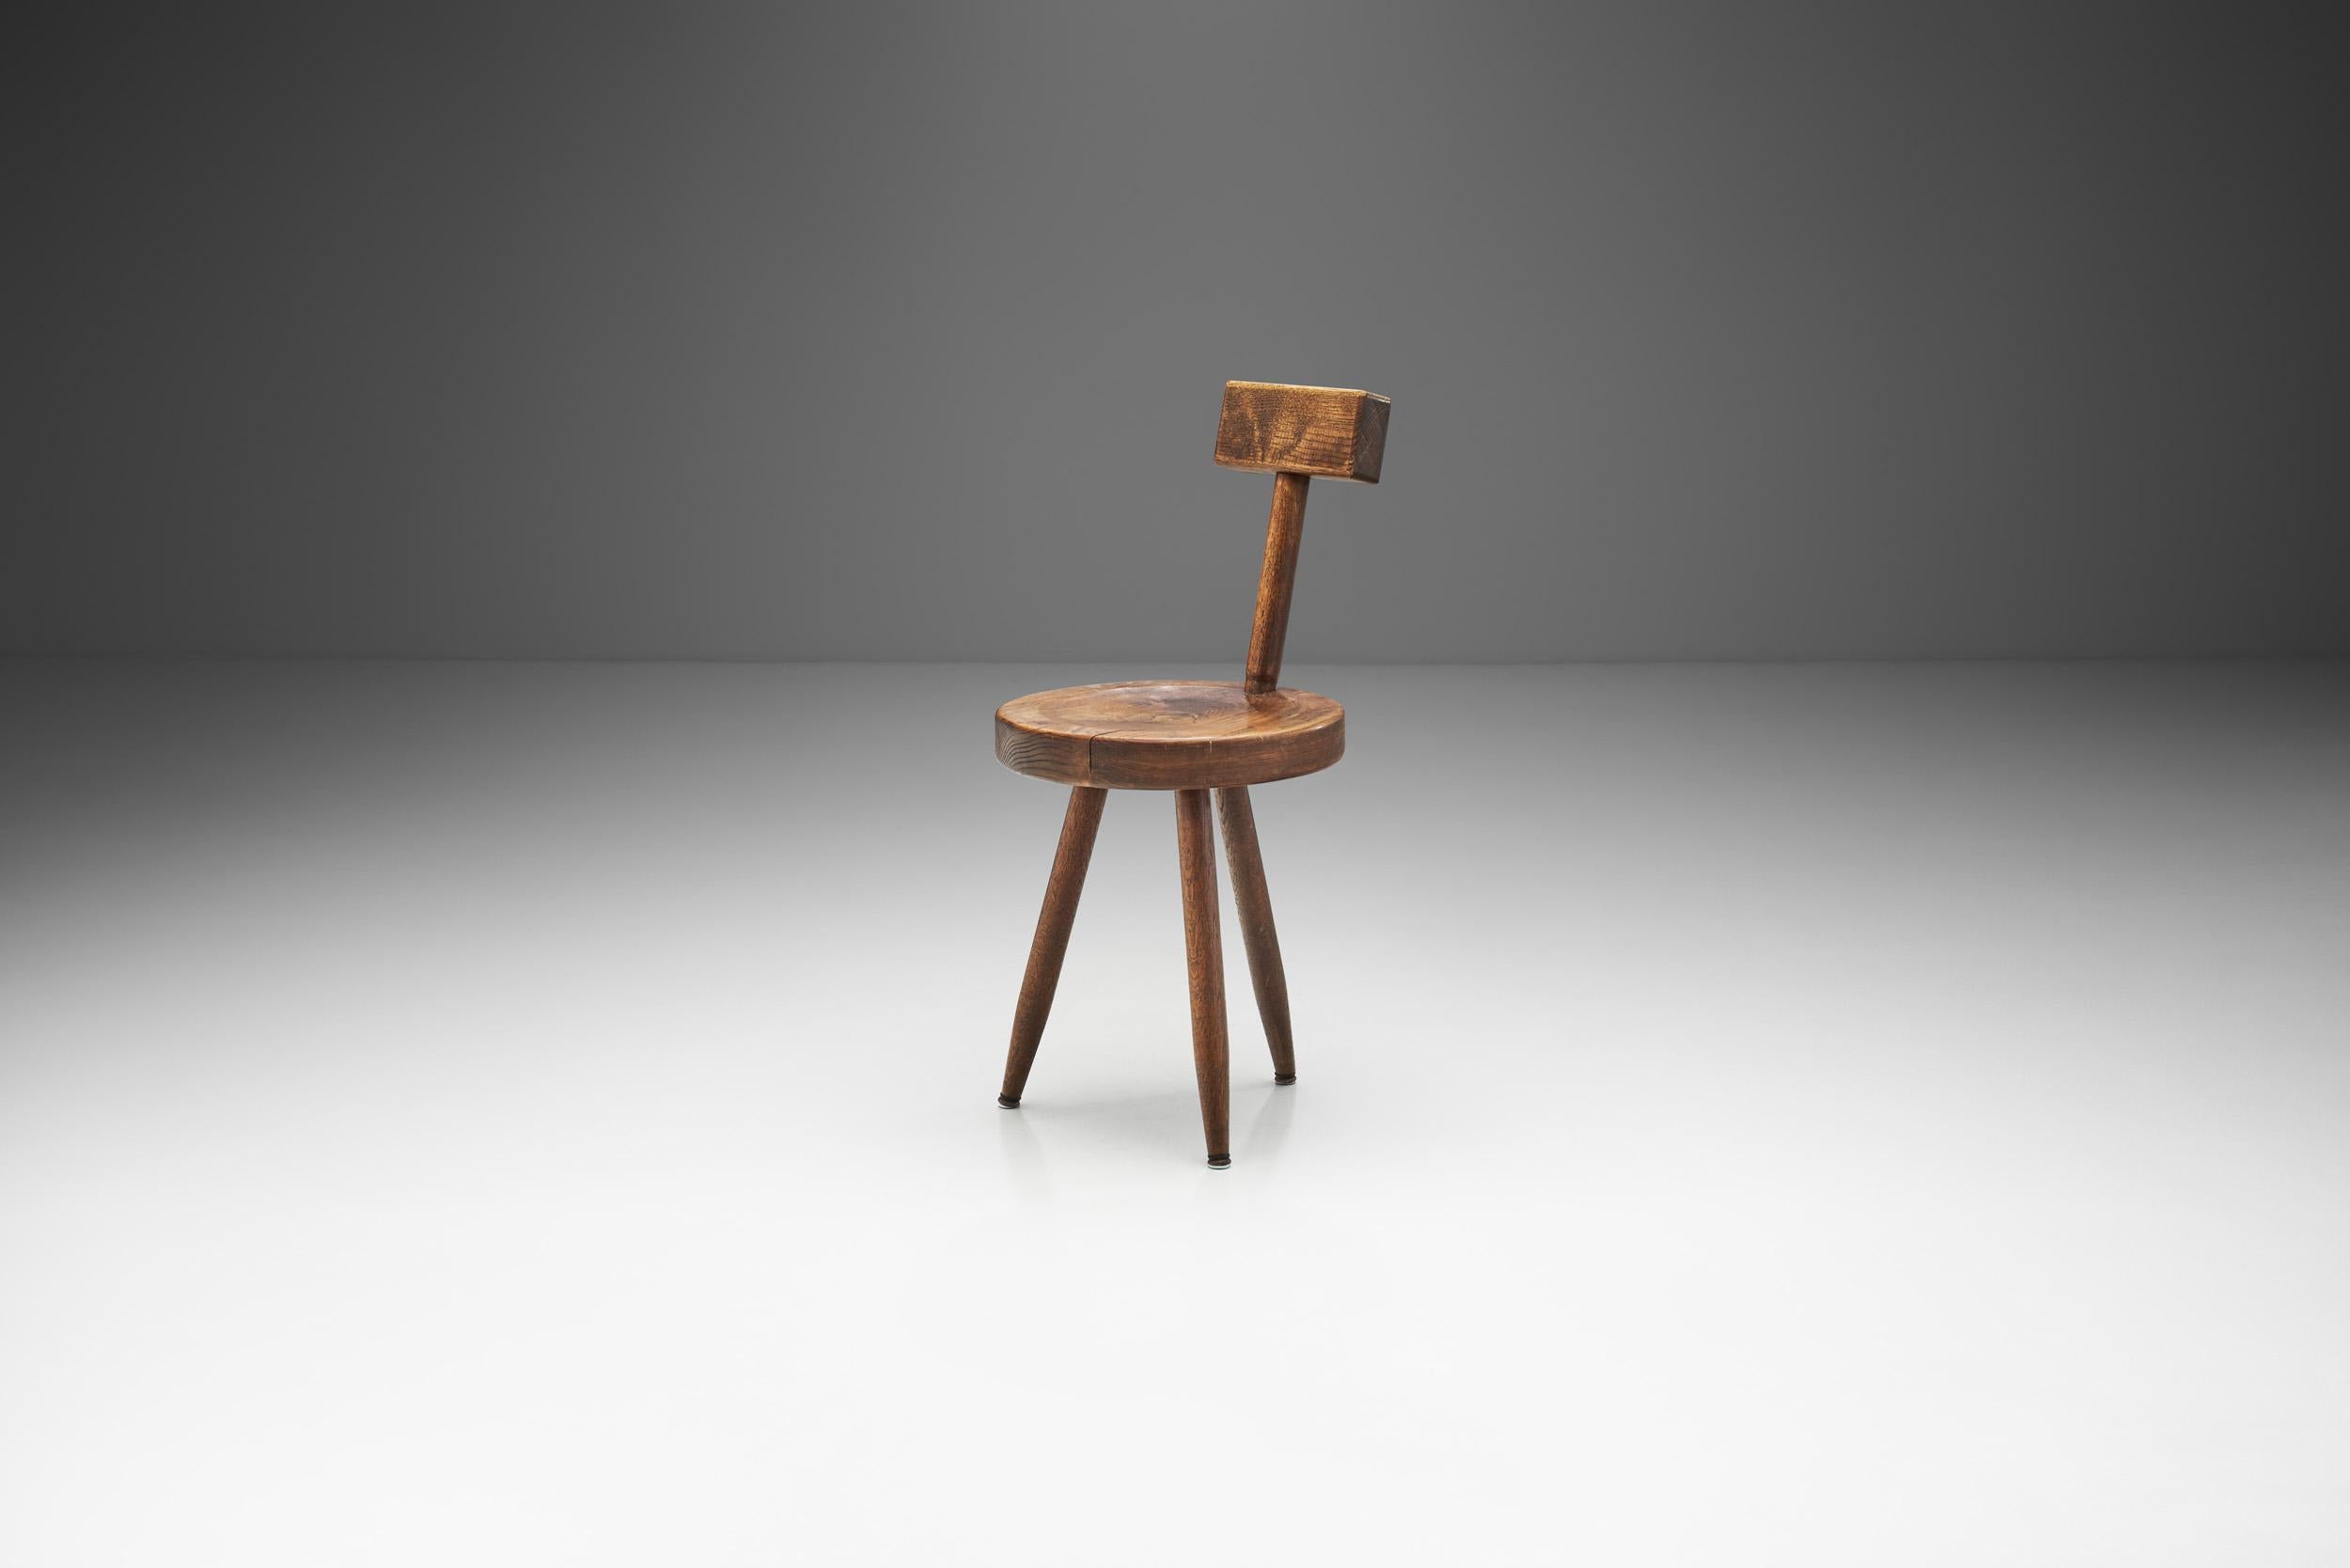 This tripod chair has a simple composition that mixes the aesthetics of rural handicraft with international modernism.

While many postwar French designers were embracing new industrial techniques and mass production, some, like Alexandre Noll,